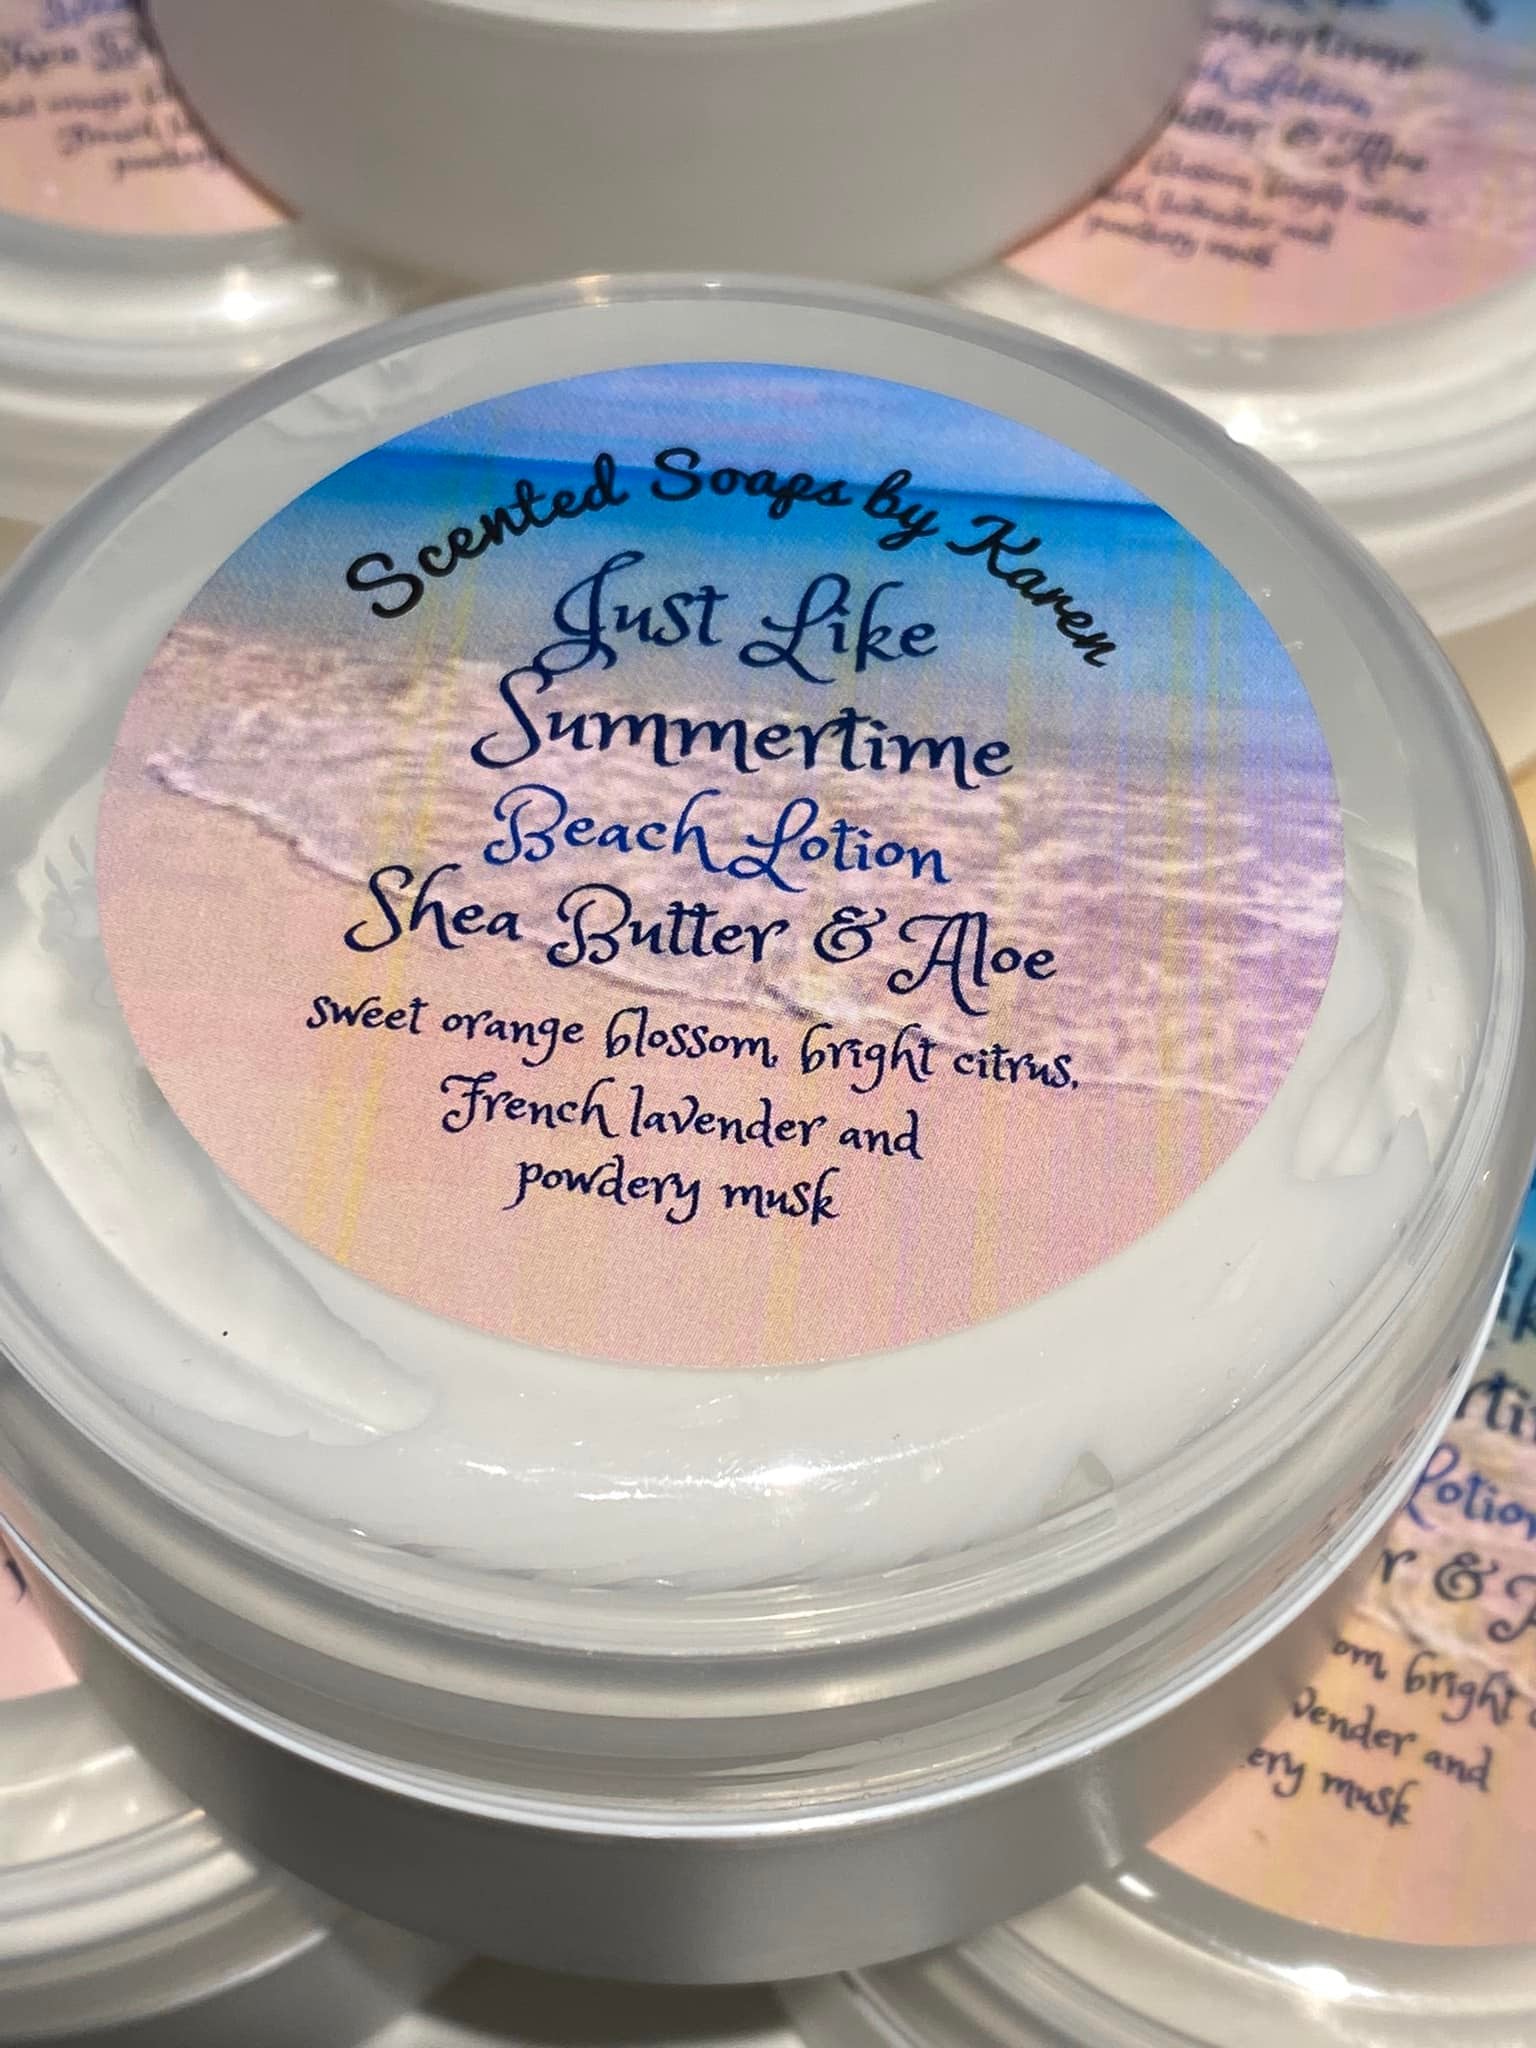 Just Like Summertime Shea Butter Lotion. Smells like Bermuda, the Bahamas and Aruba all in one.